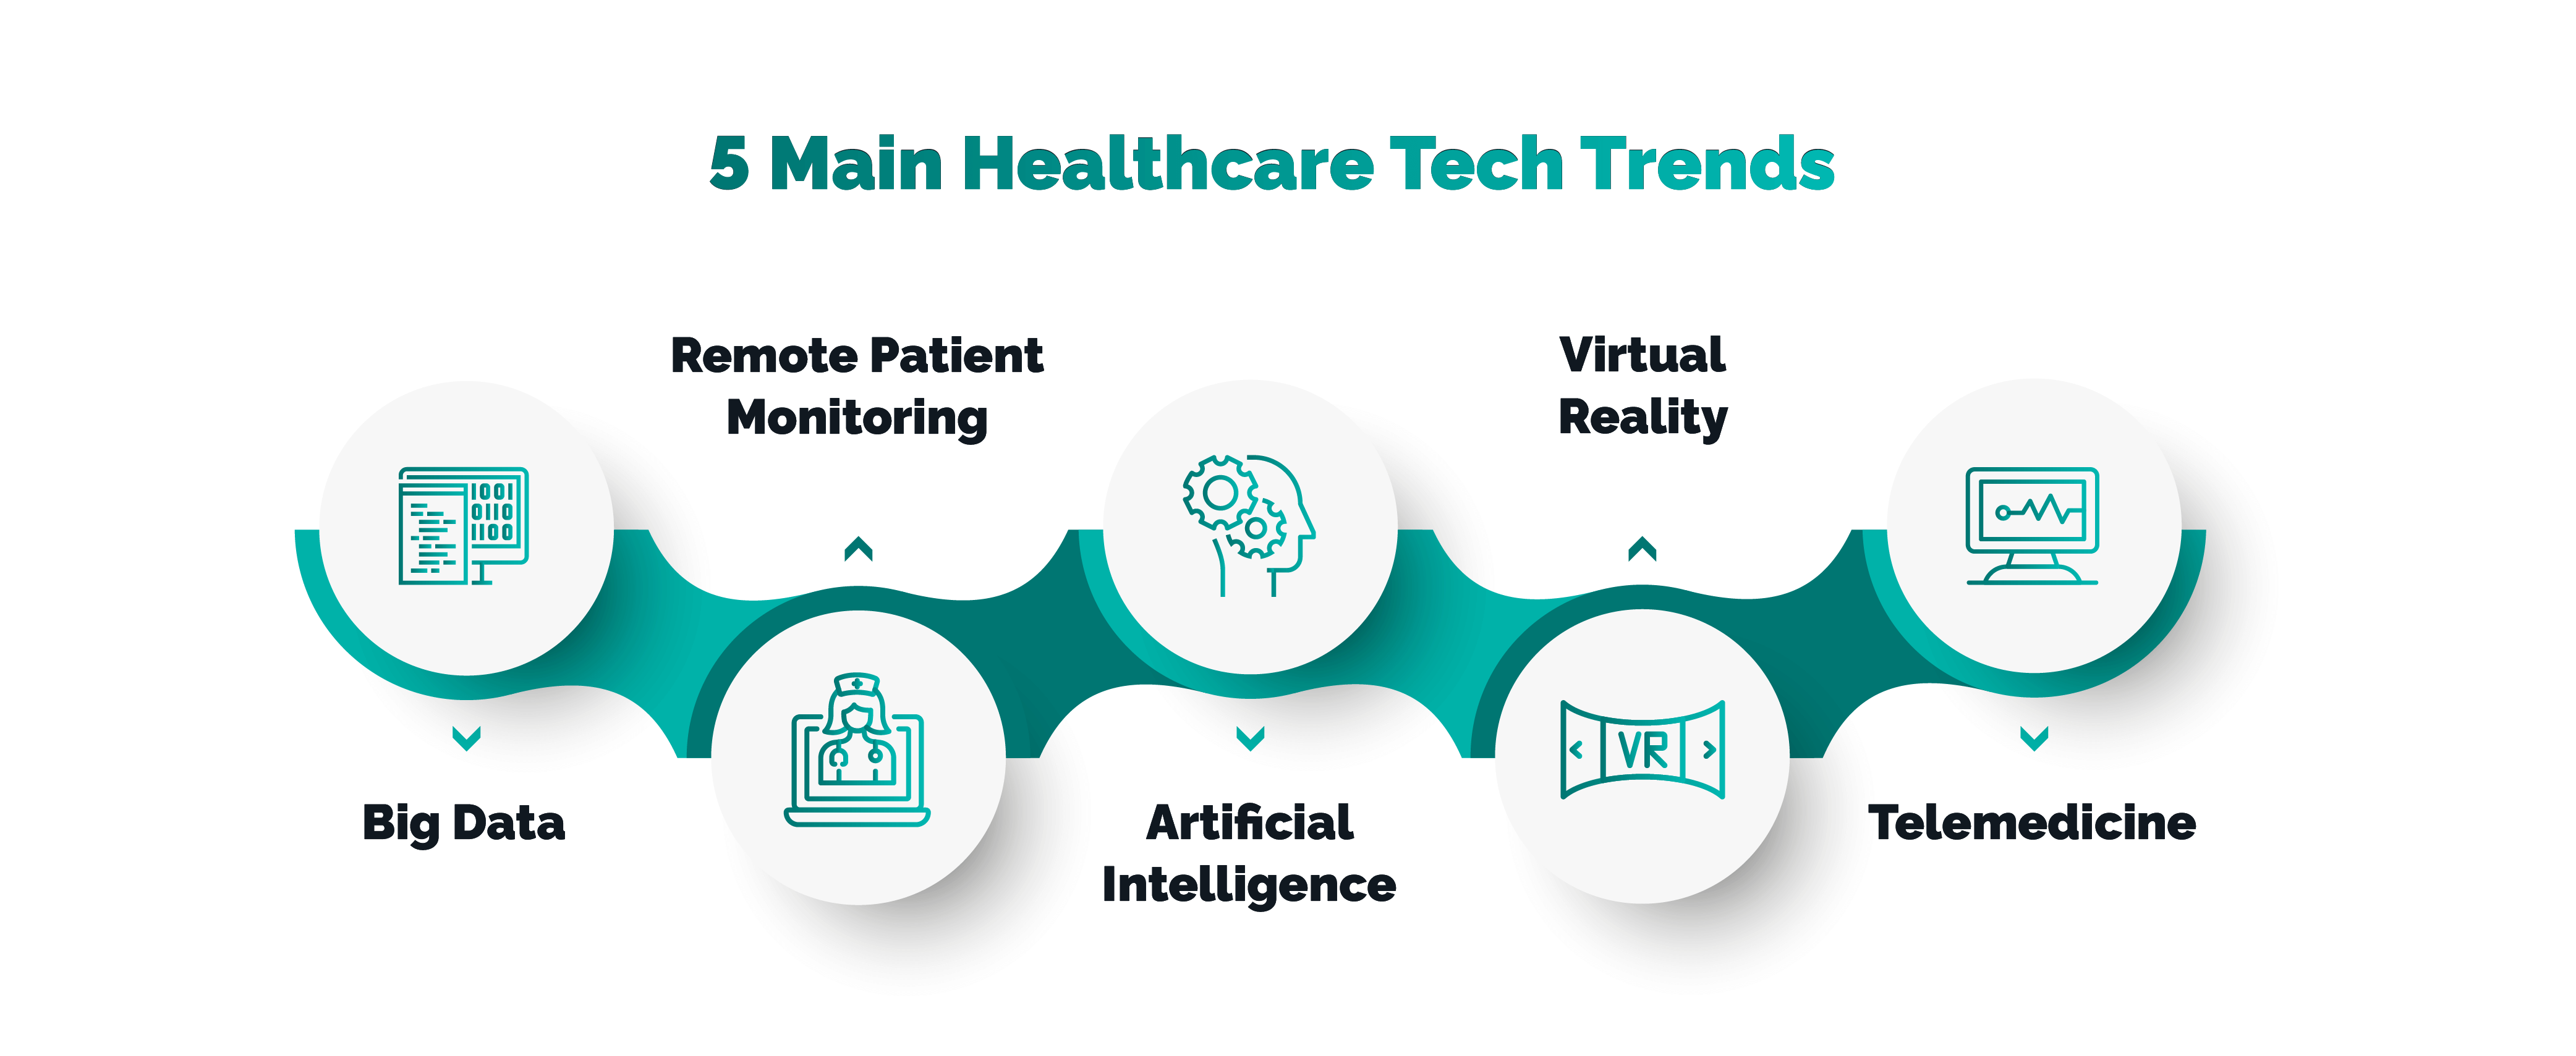 Ar Top Health Tech Trends For 2022 02 